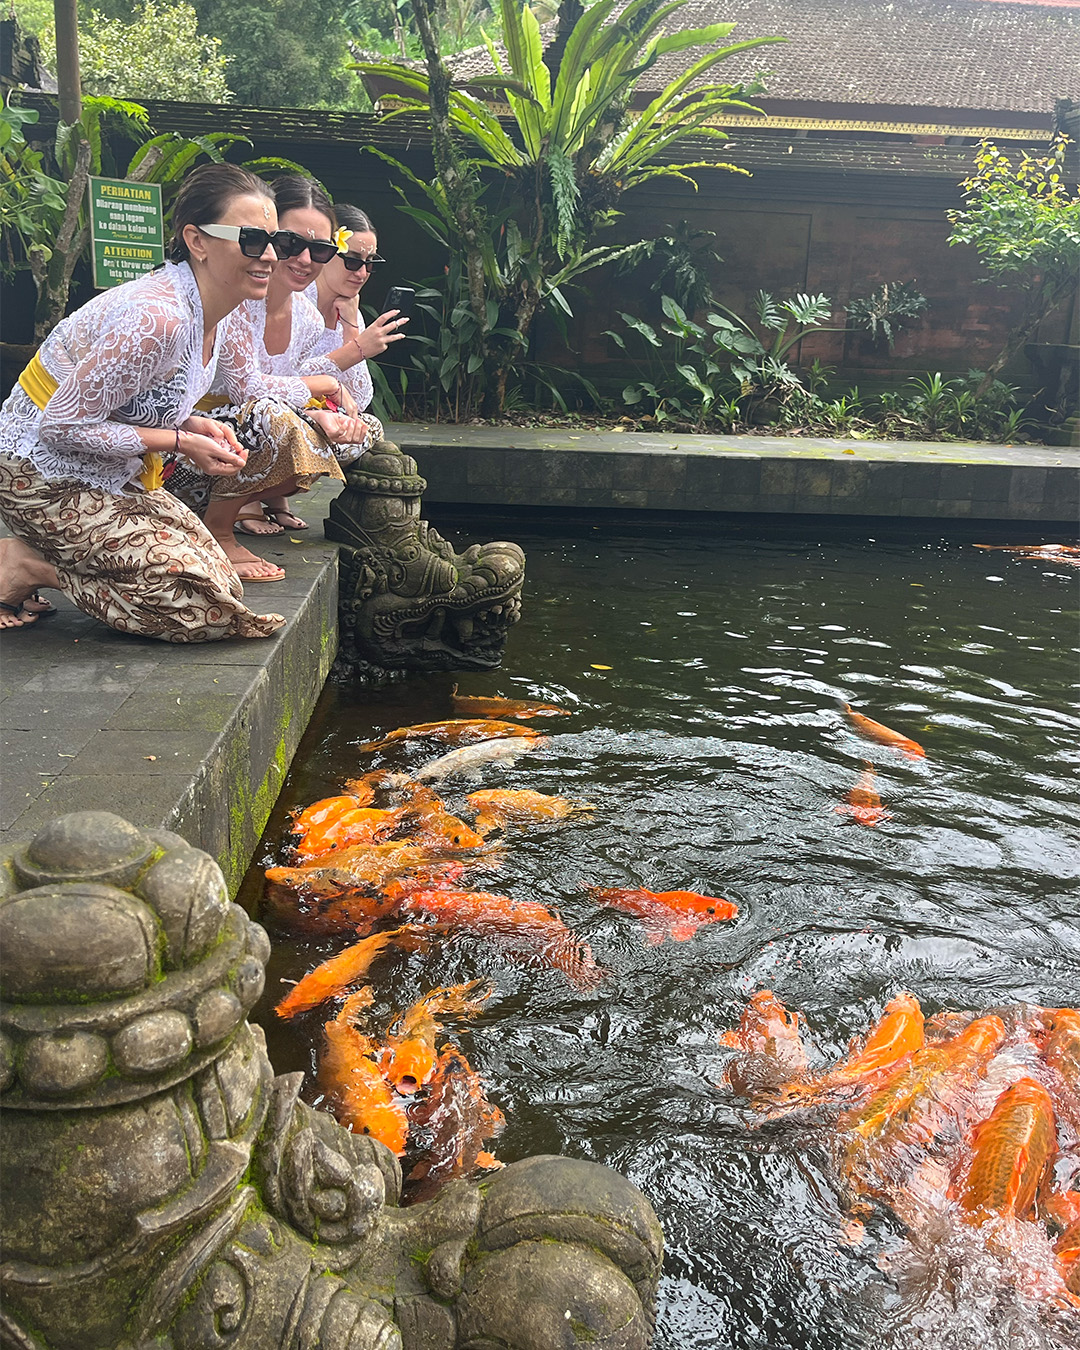 Joyful women looking at Koi fishes in pond